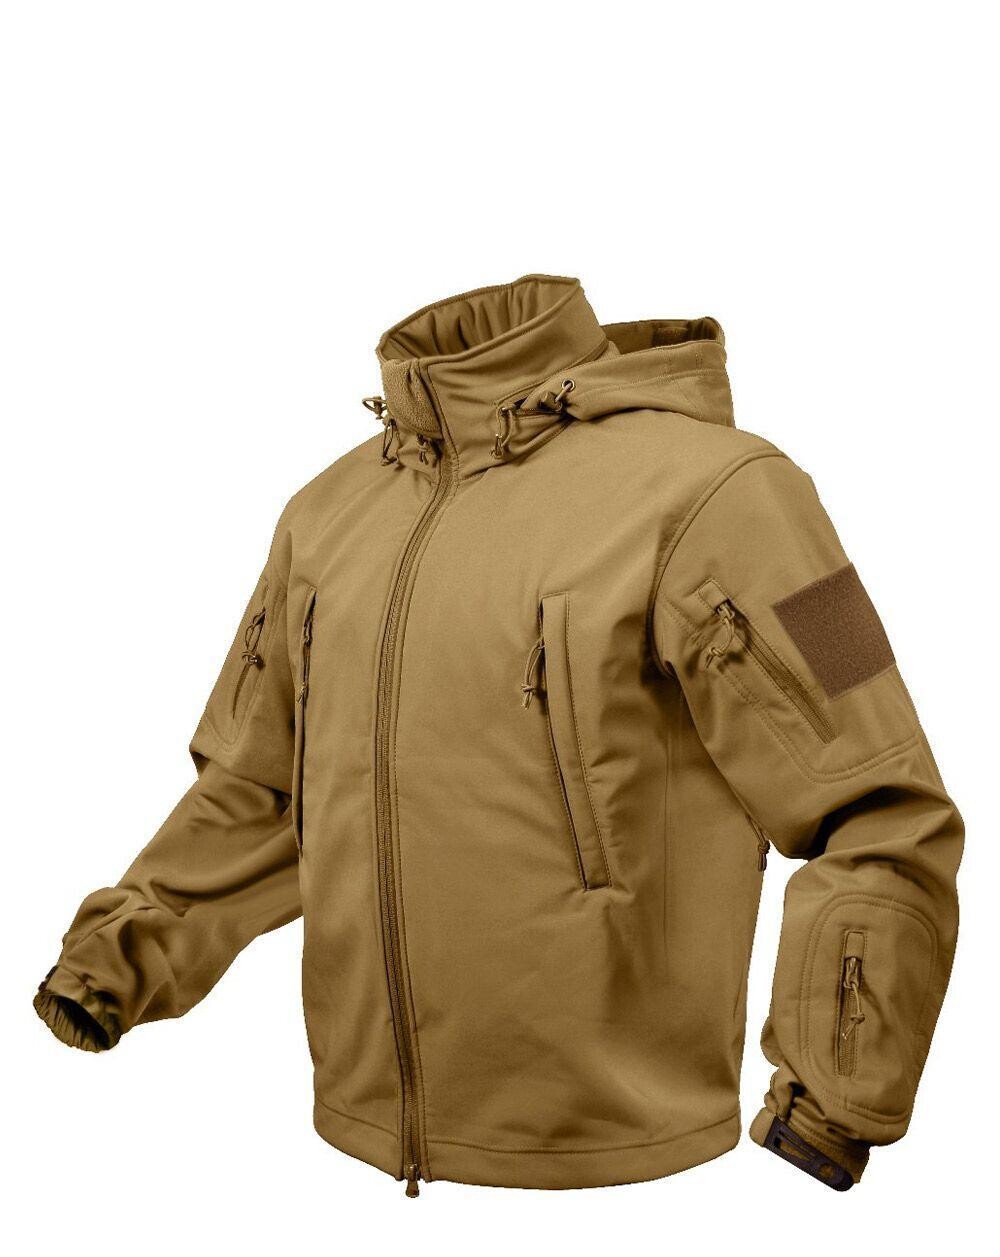 16: Rothco Special Ops Softshell Jakke (Coyote Brun, XS)